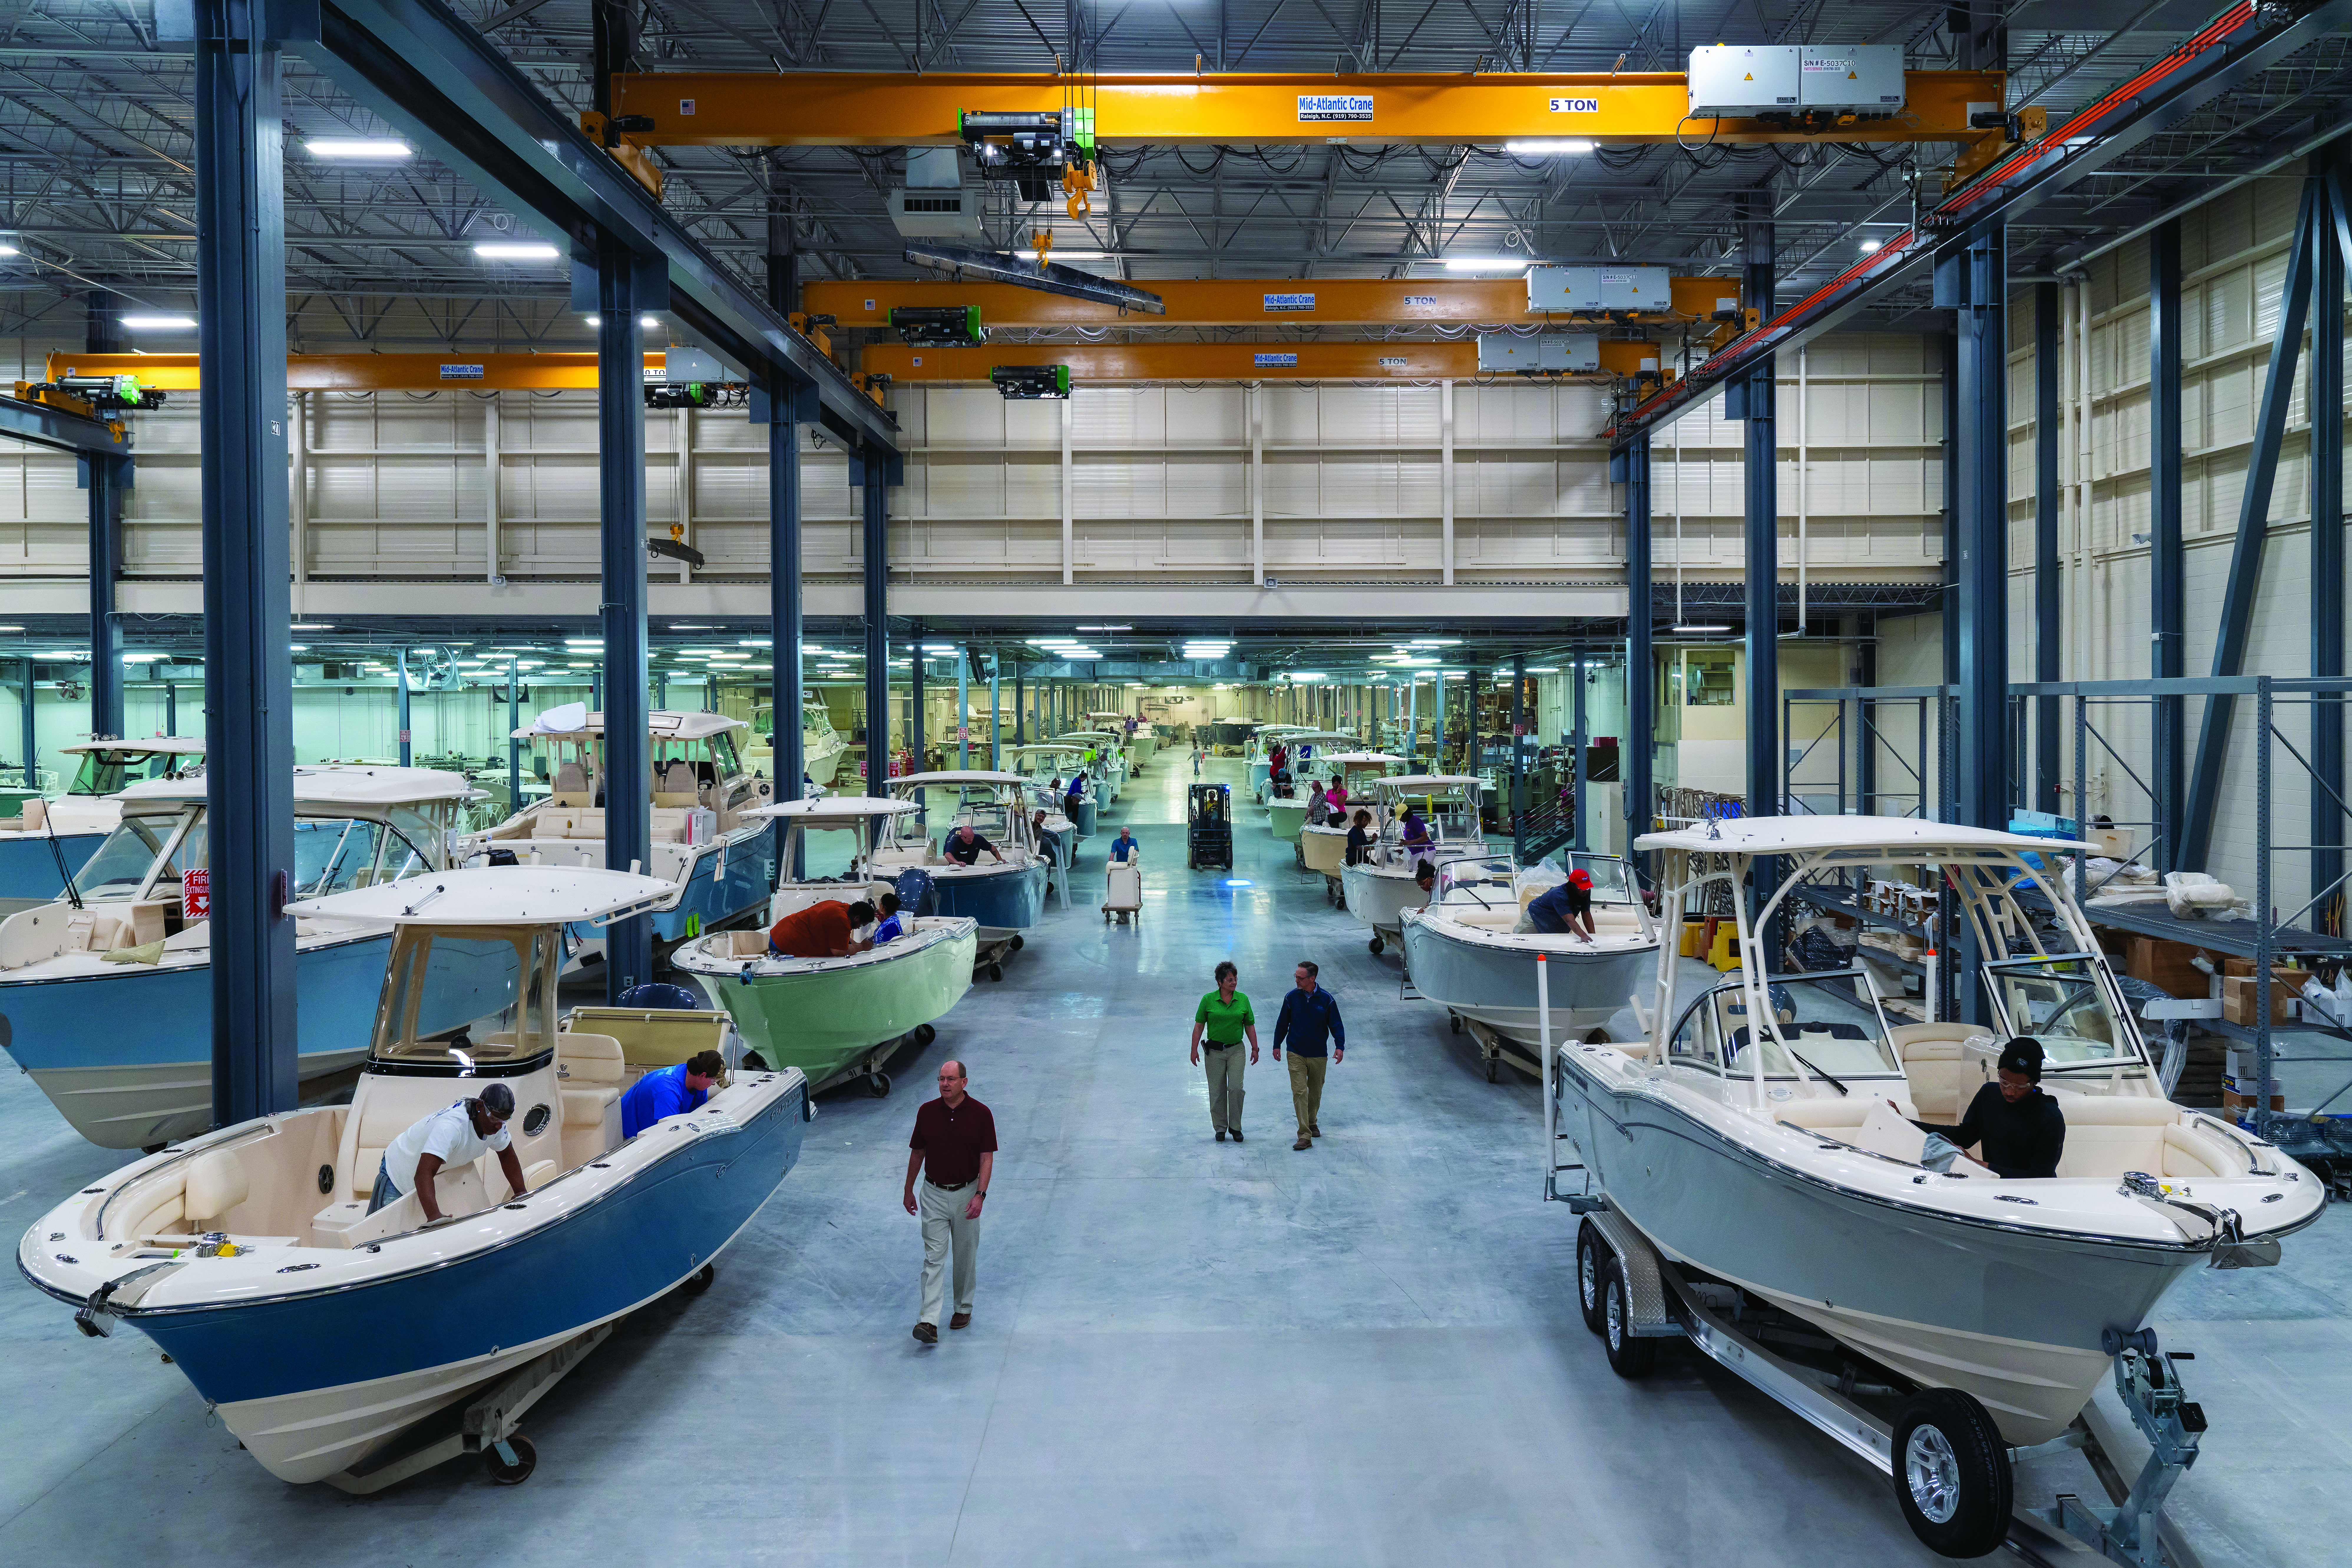 Interior view of the Grady-White plant showing boats lined up in production